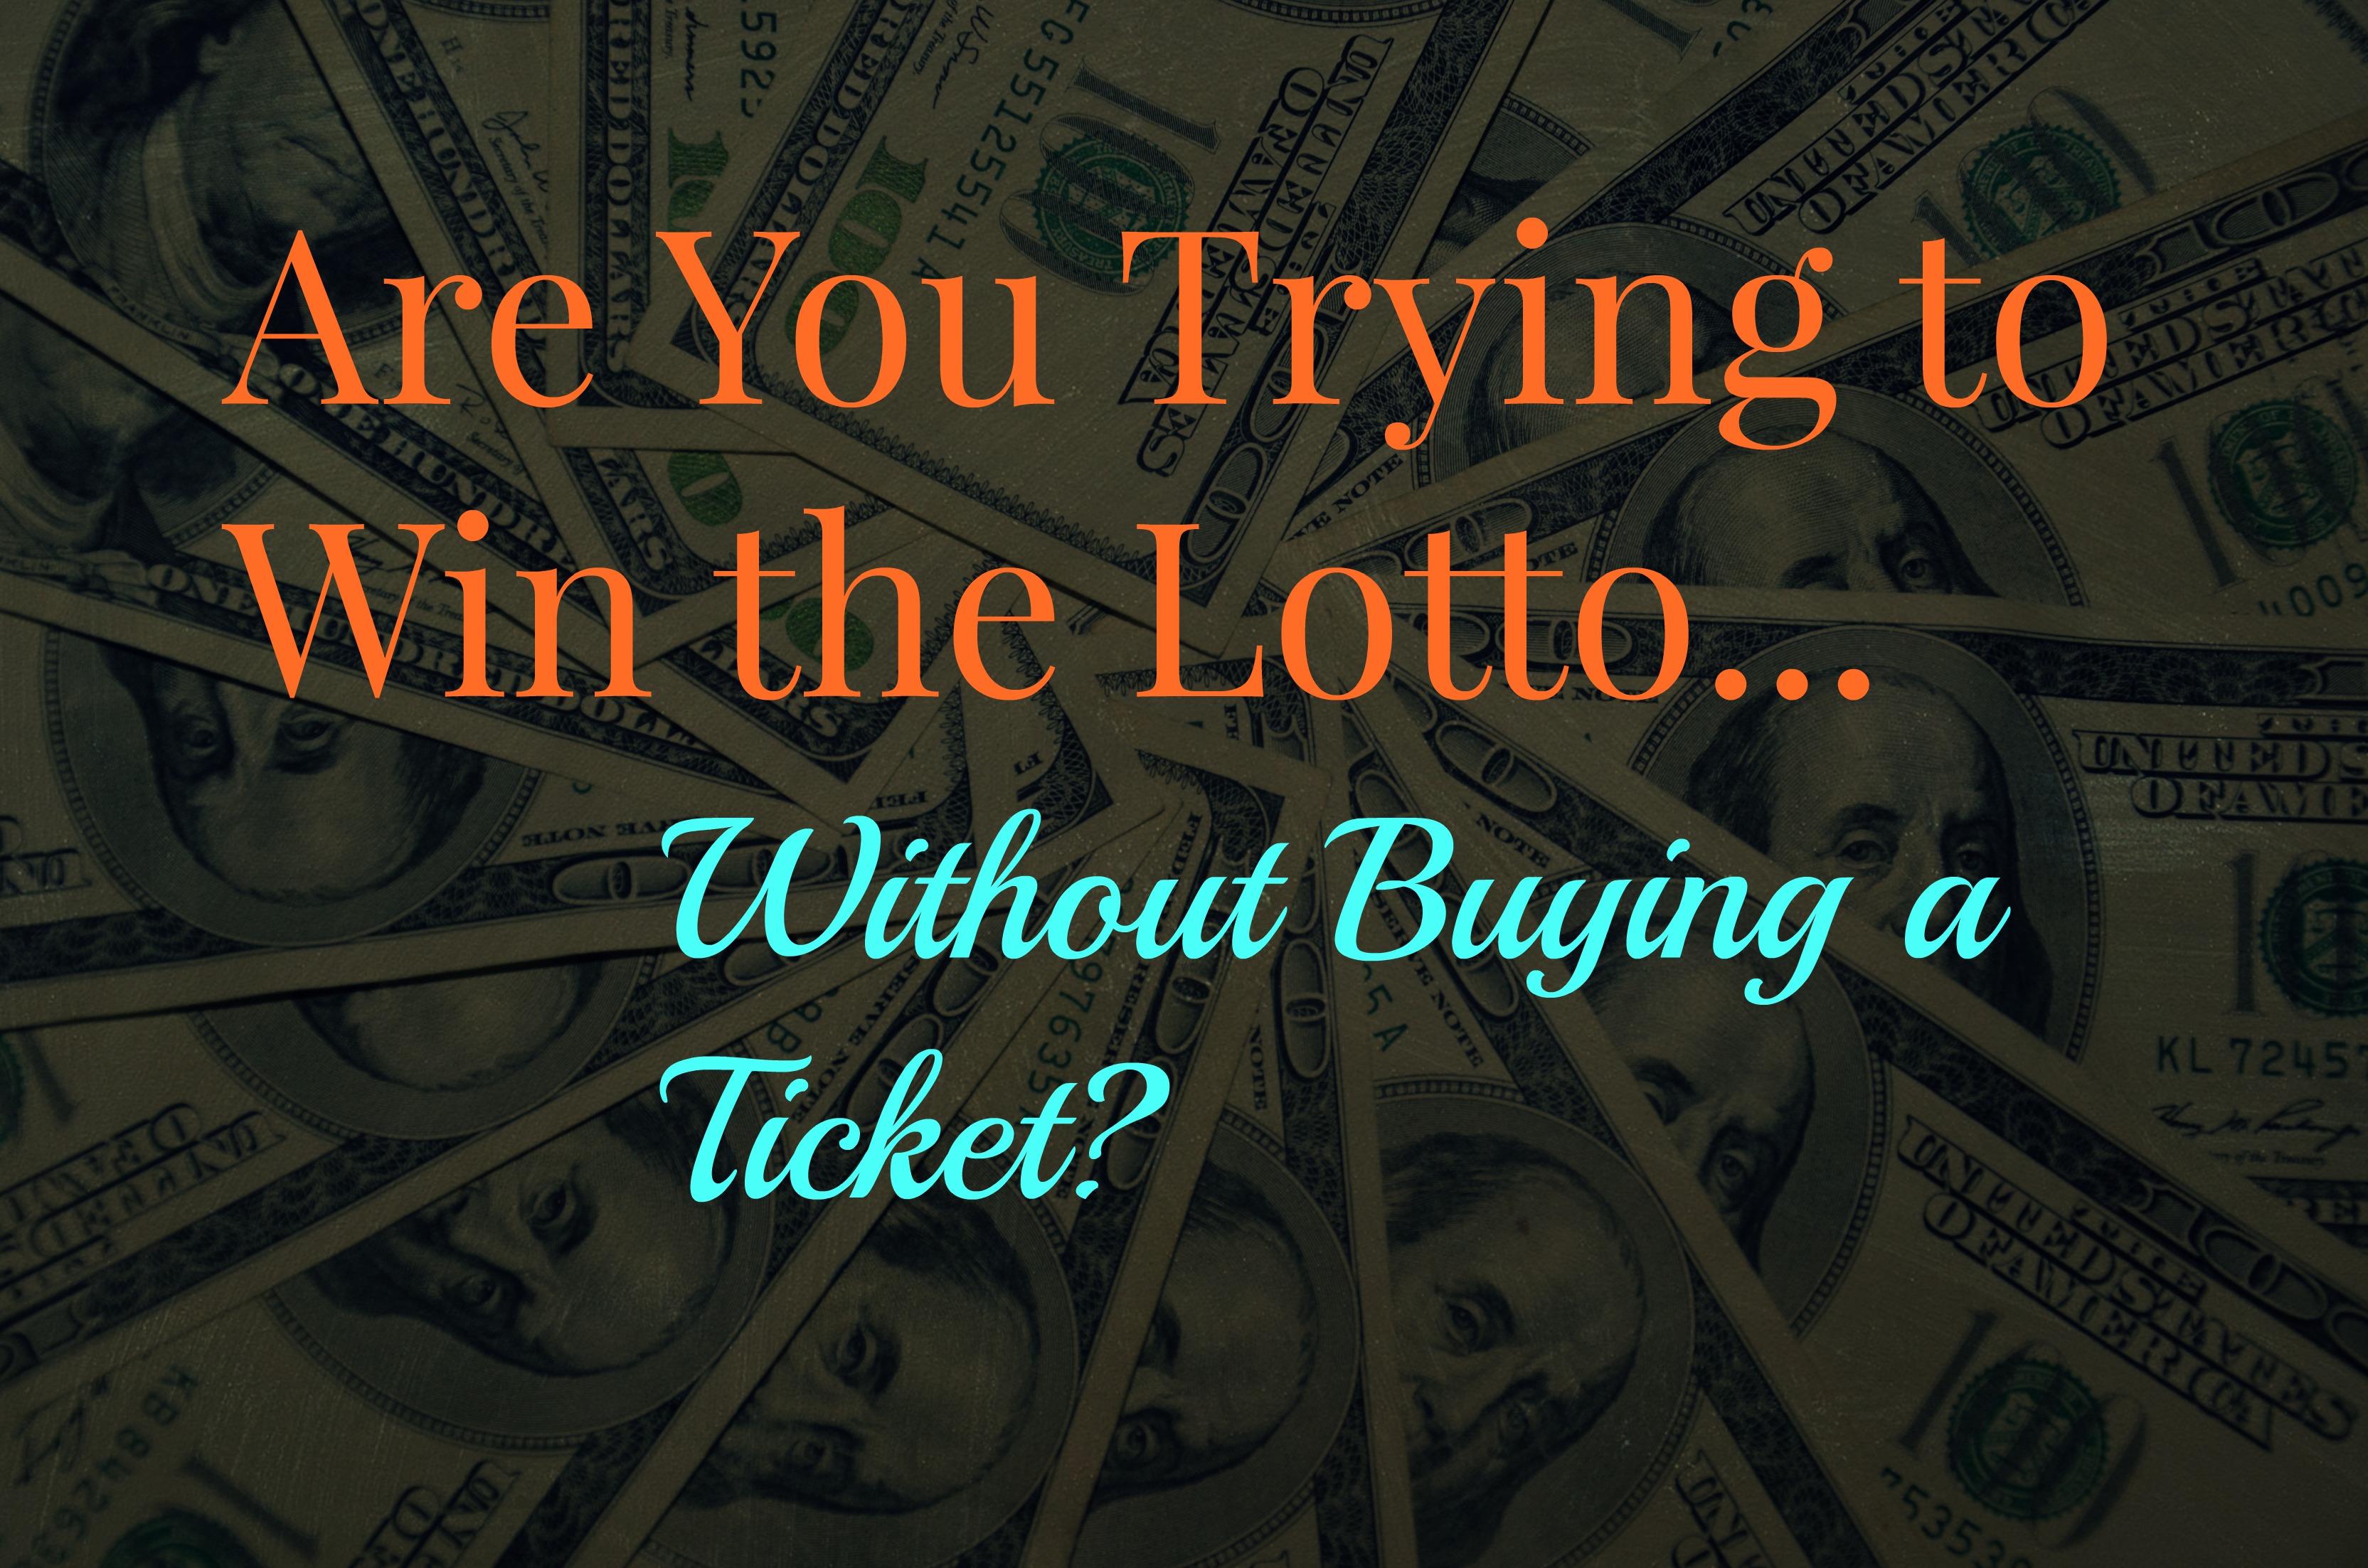 Are You Trying to Win the Lotto Without Buying a Ticket?